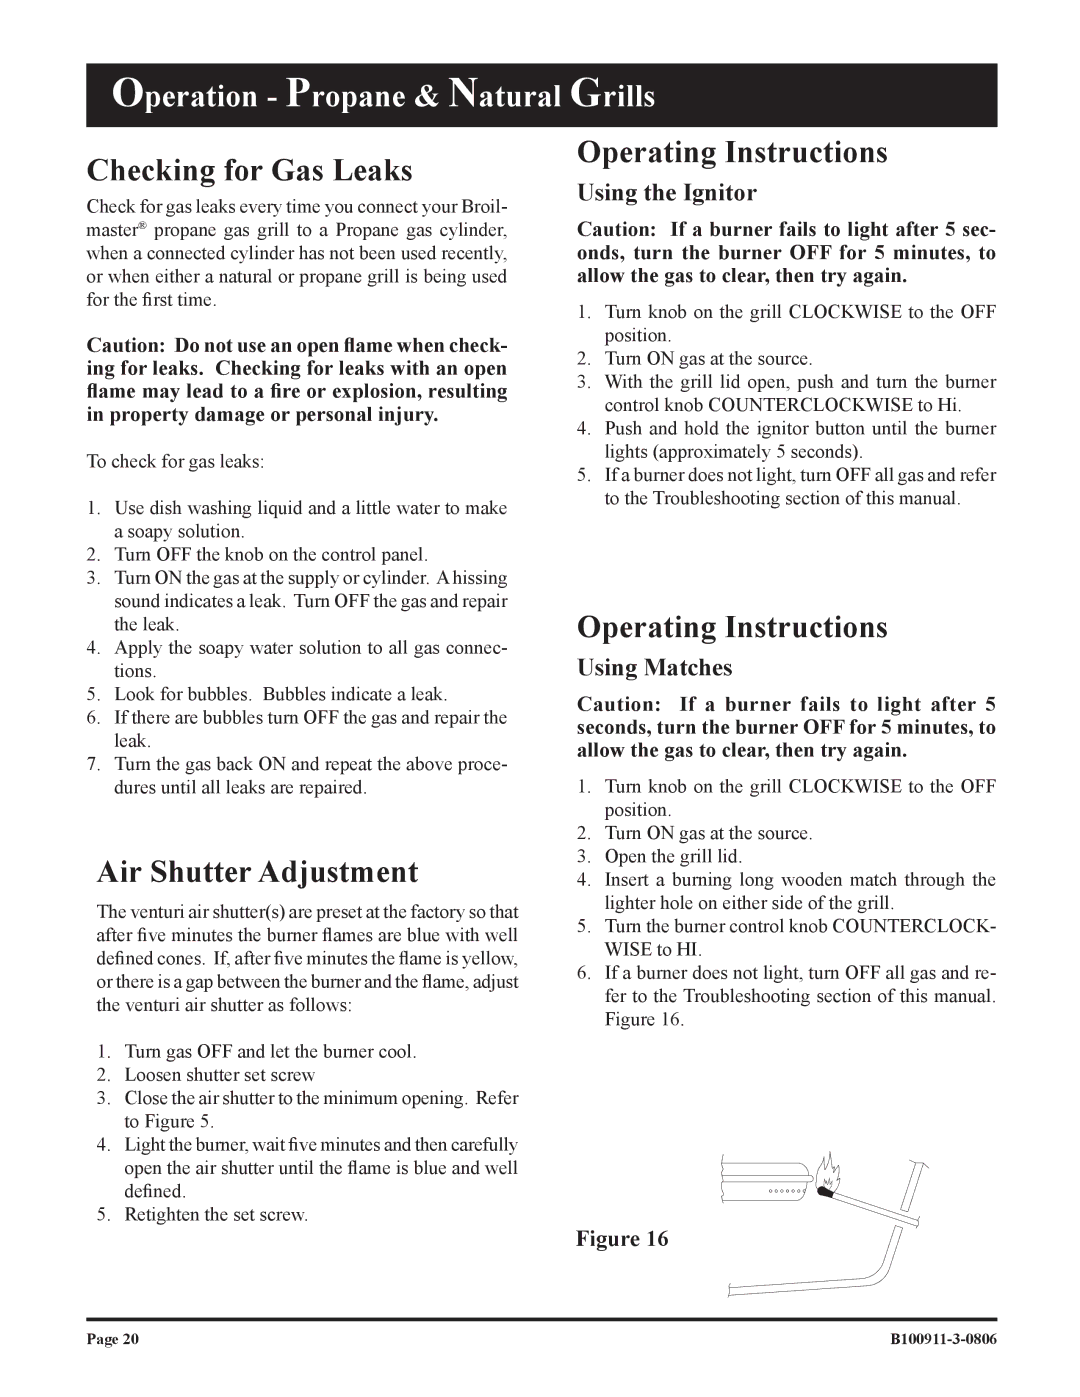 Broilmaster P3-1, P4-1 owner manual Checking for Gas Leaks, Air Shutter Adjustment, Operating Instructions 